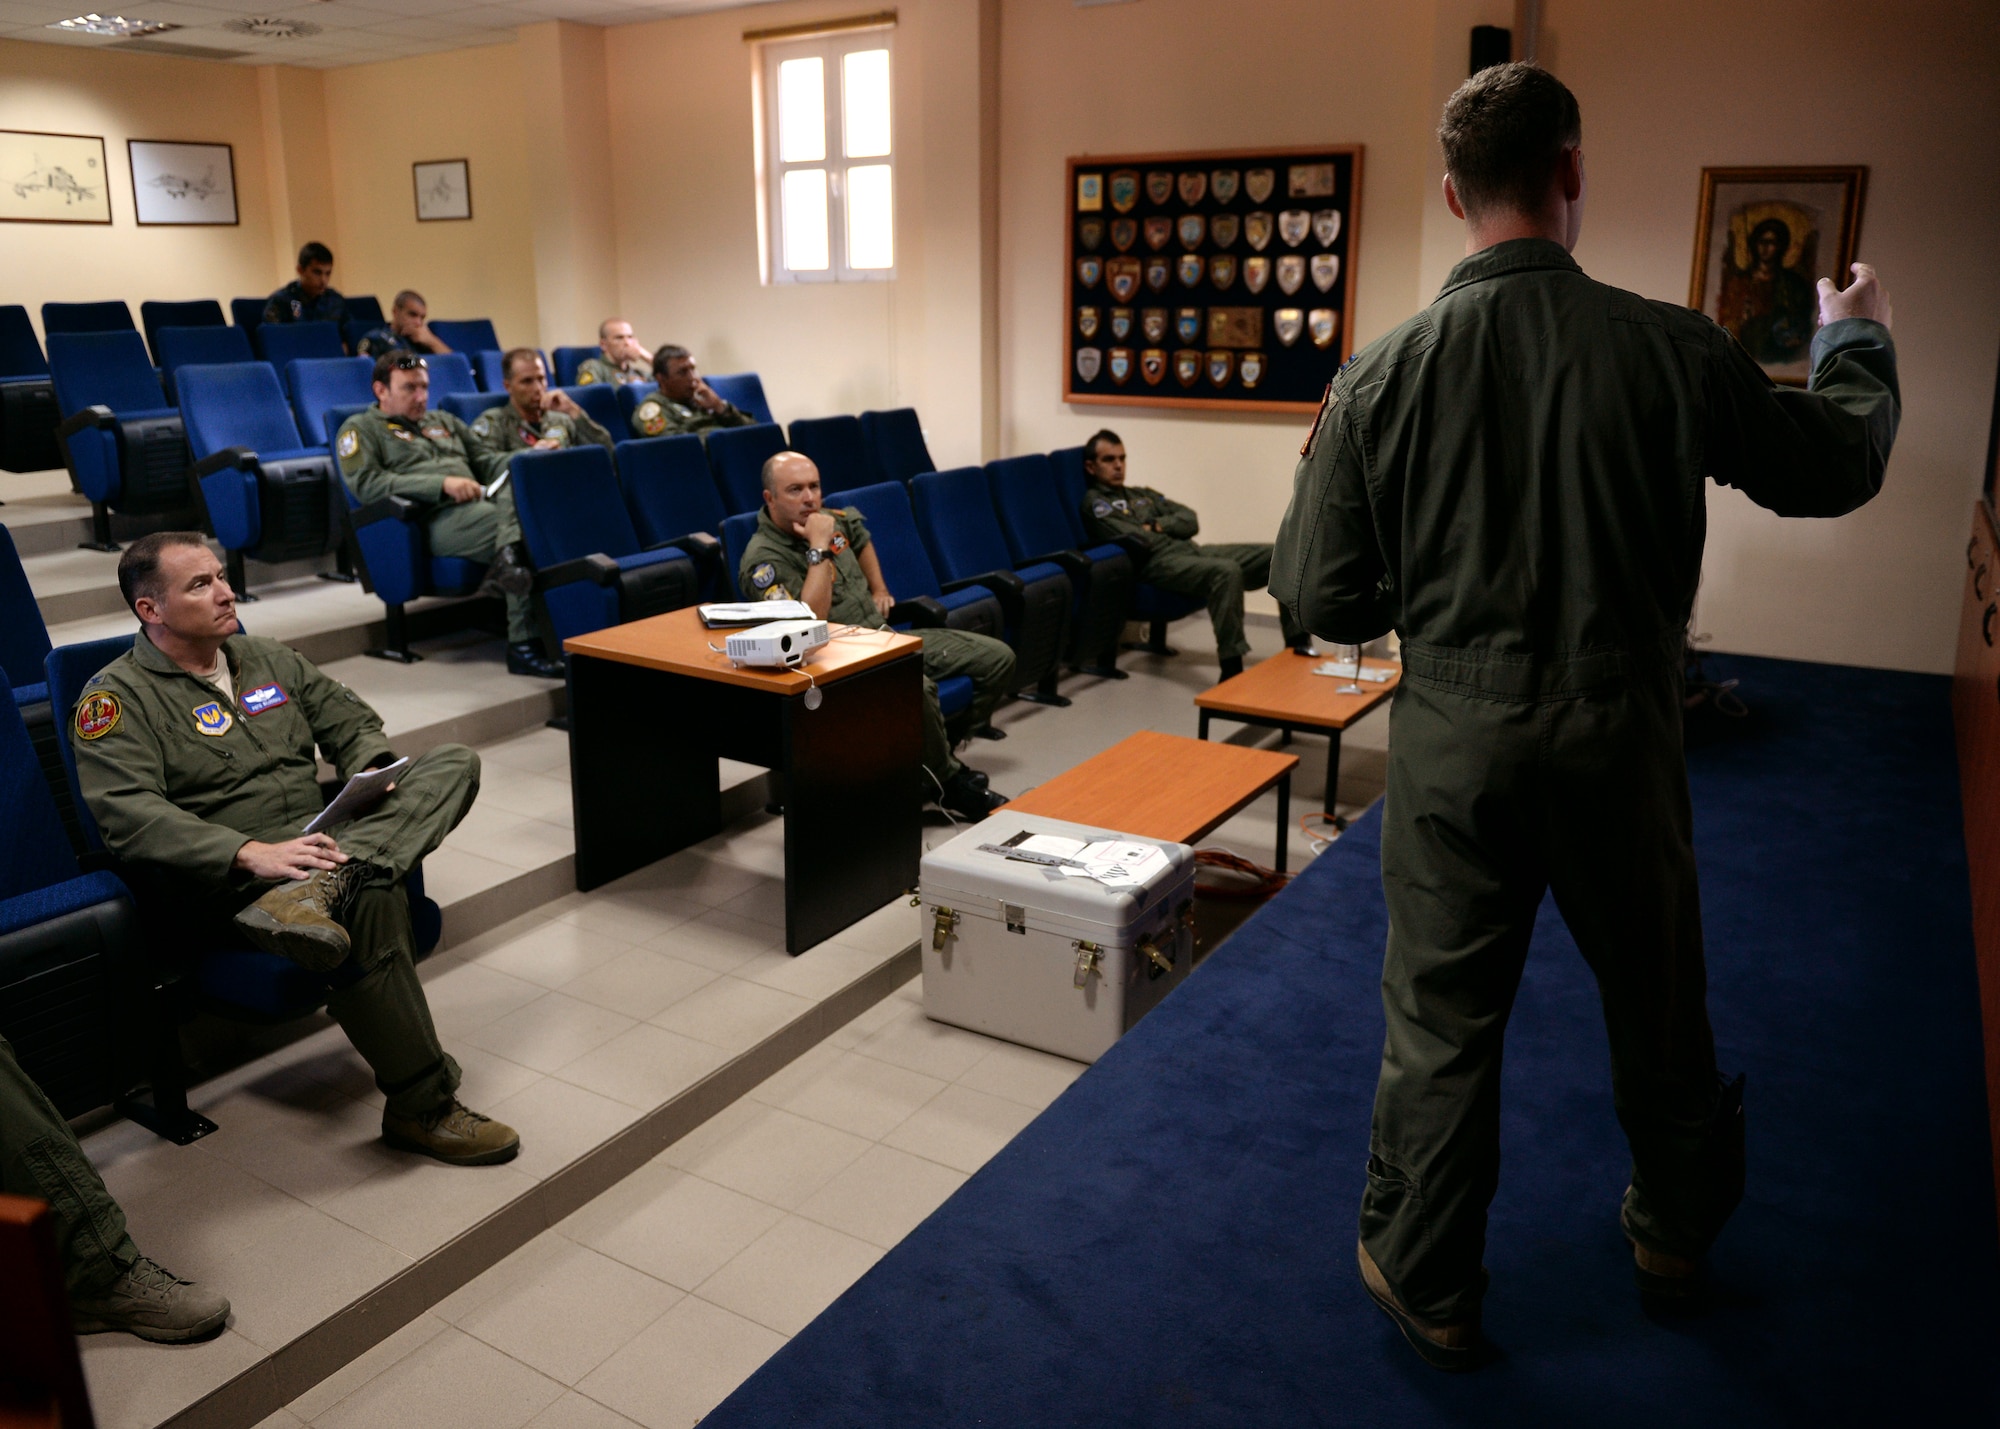 A pilot from the 480th Fighter Squadron from Spangdahlem Air Base, Germany, briefs a group of U.S. and Greek pilots Aug. 12, 2014, before a flying mission at the bilateral training event in Souda Bay, Greece. The pilots attend the mass briefing to clarify the objectives of the day's training and to receive the latest information on the weather and threat intelligence. (U.S. Air Force photo by Staff Sgt. Daryl Knee/Released)